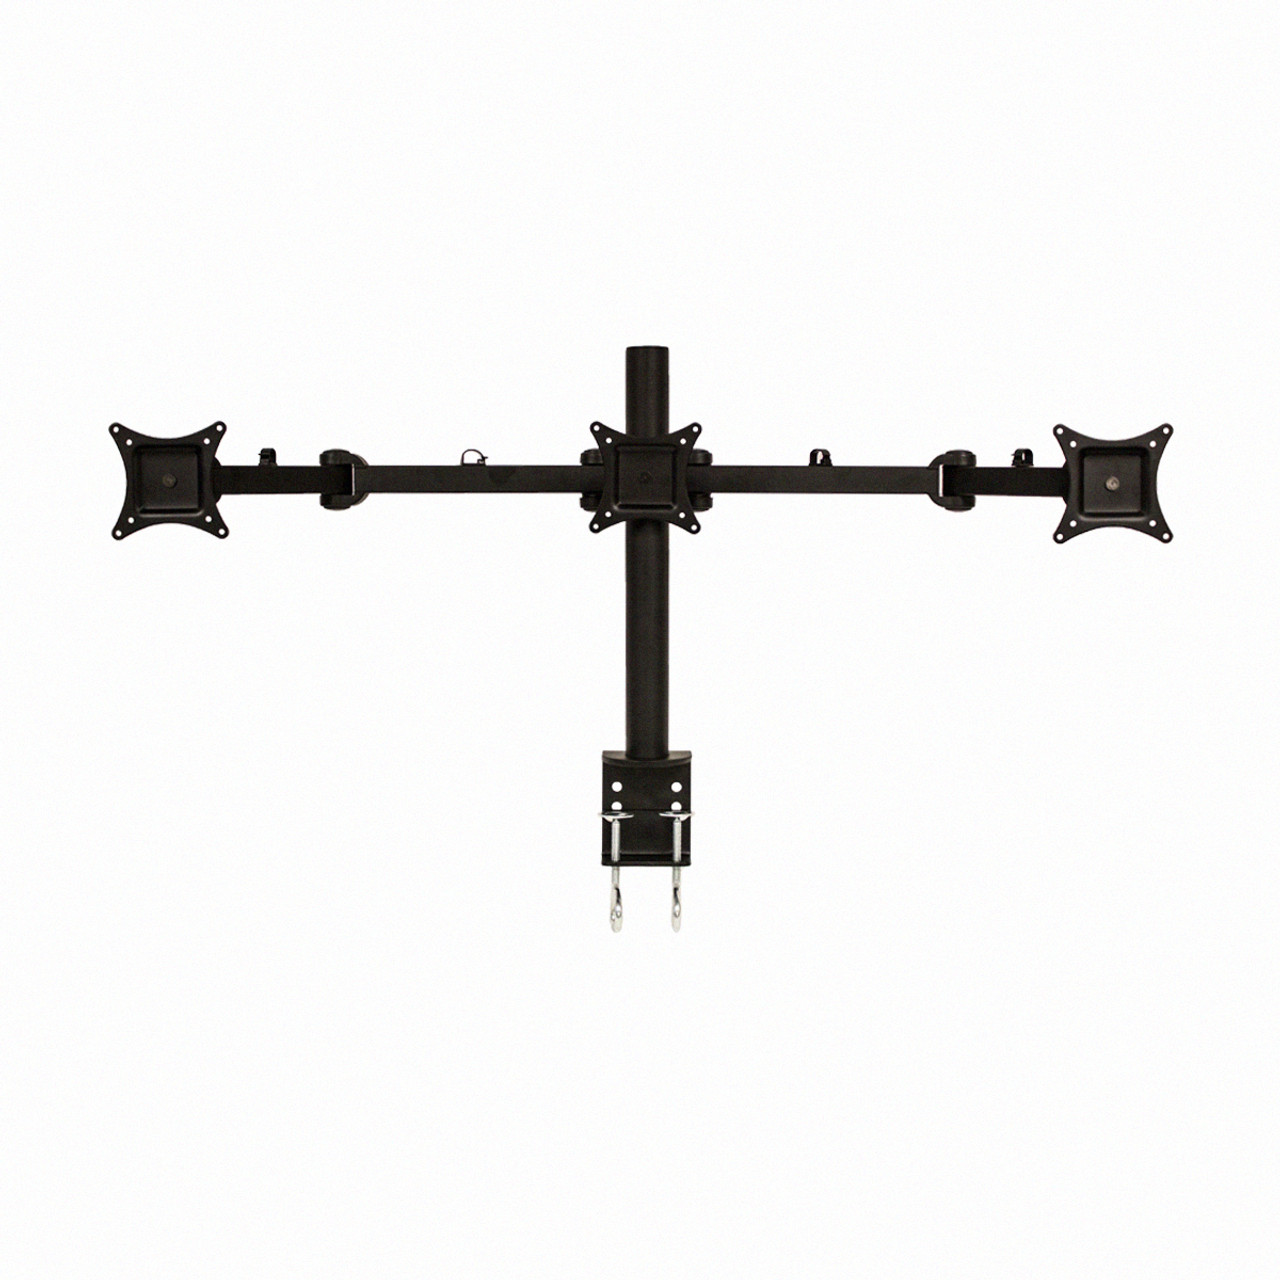 NavePoint Triple LCD Articulating Monitor Mount 3 Screens to 28-Inches